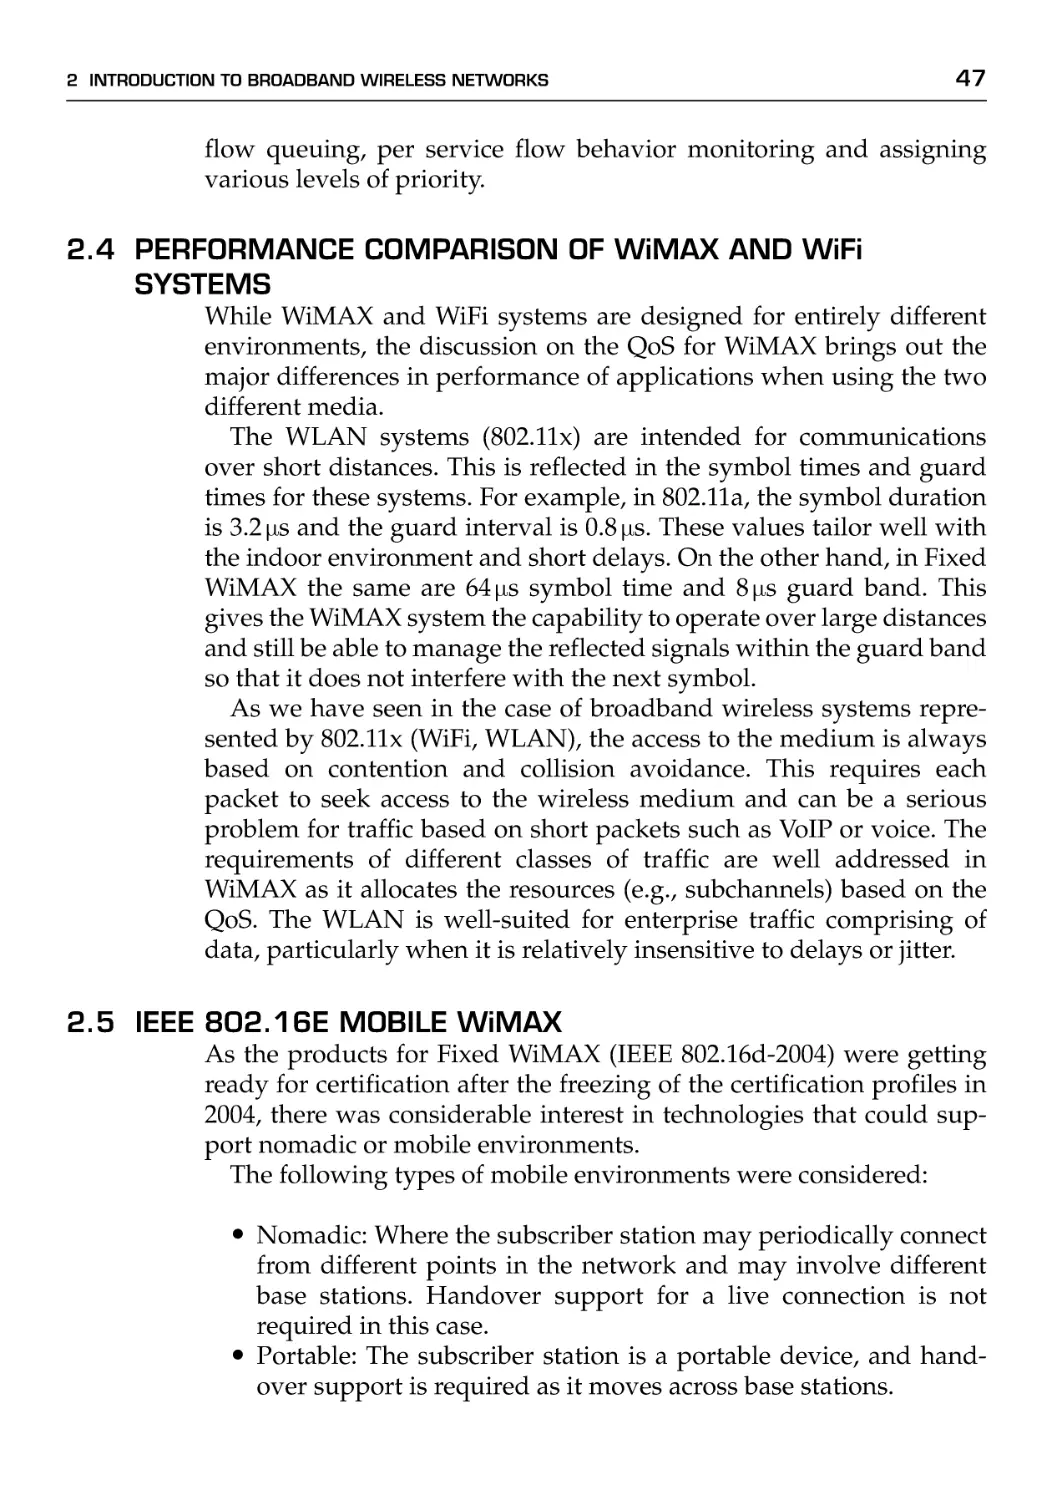 2.4 Performance Comparison of WiMax and WiFi Systems
2.5 IEEE 802.16E Mobile WiMAX